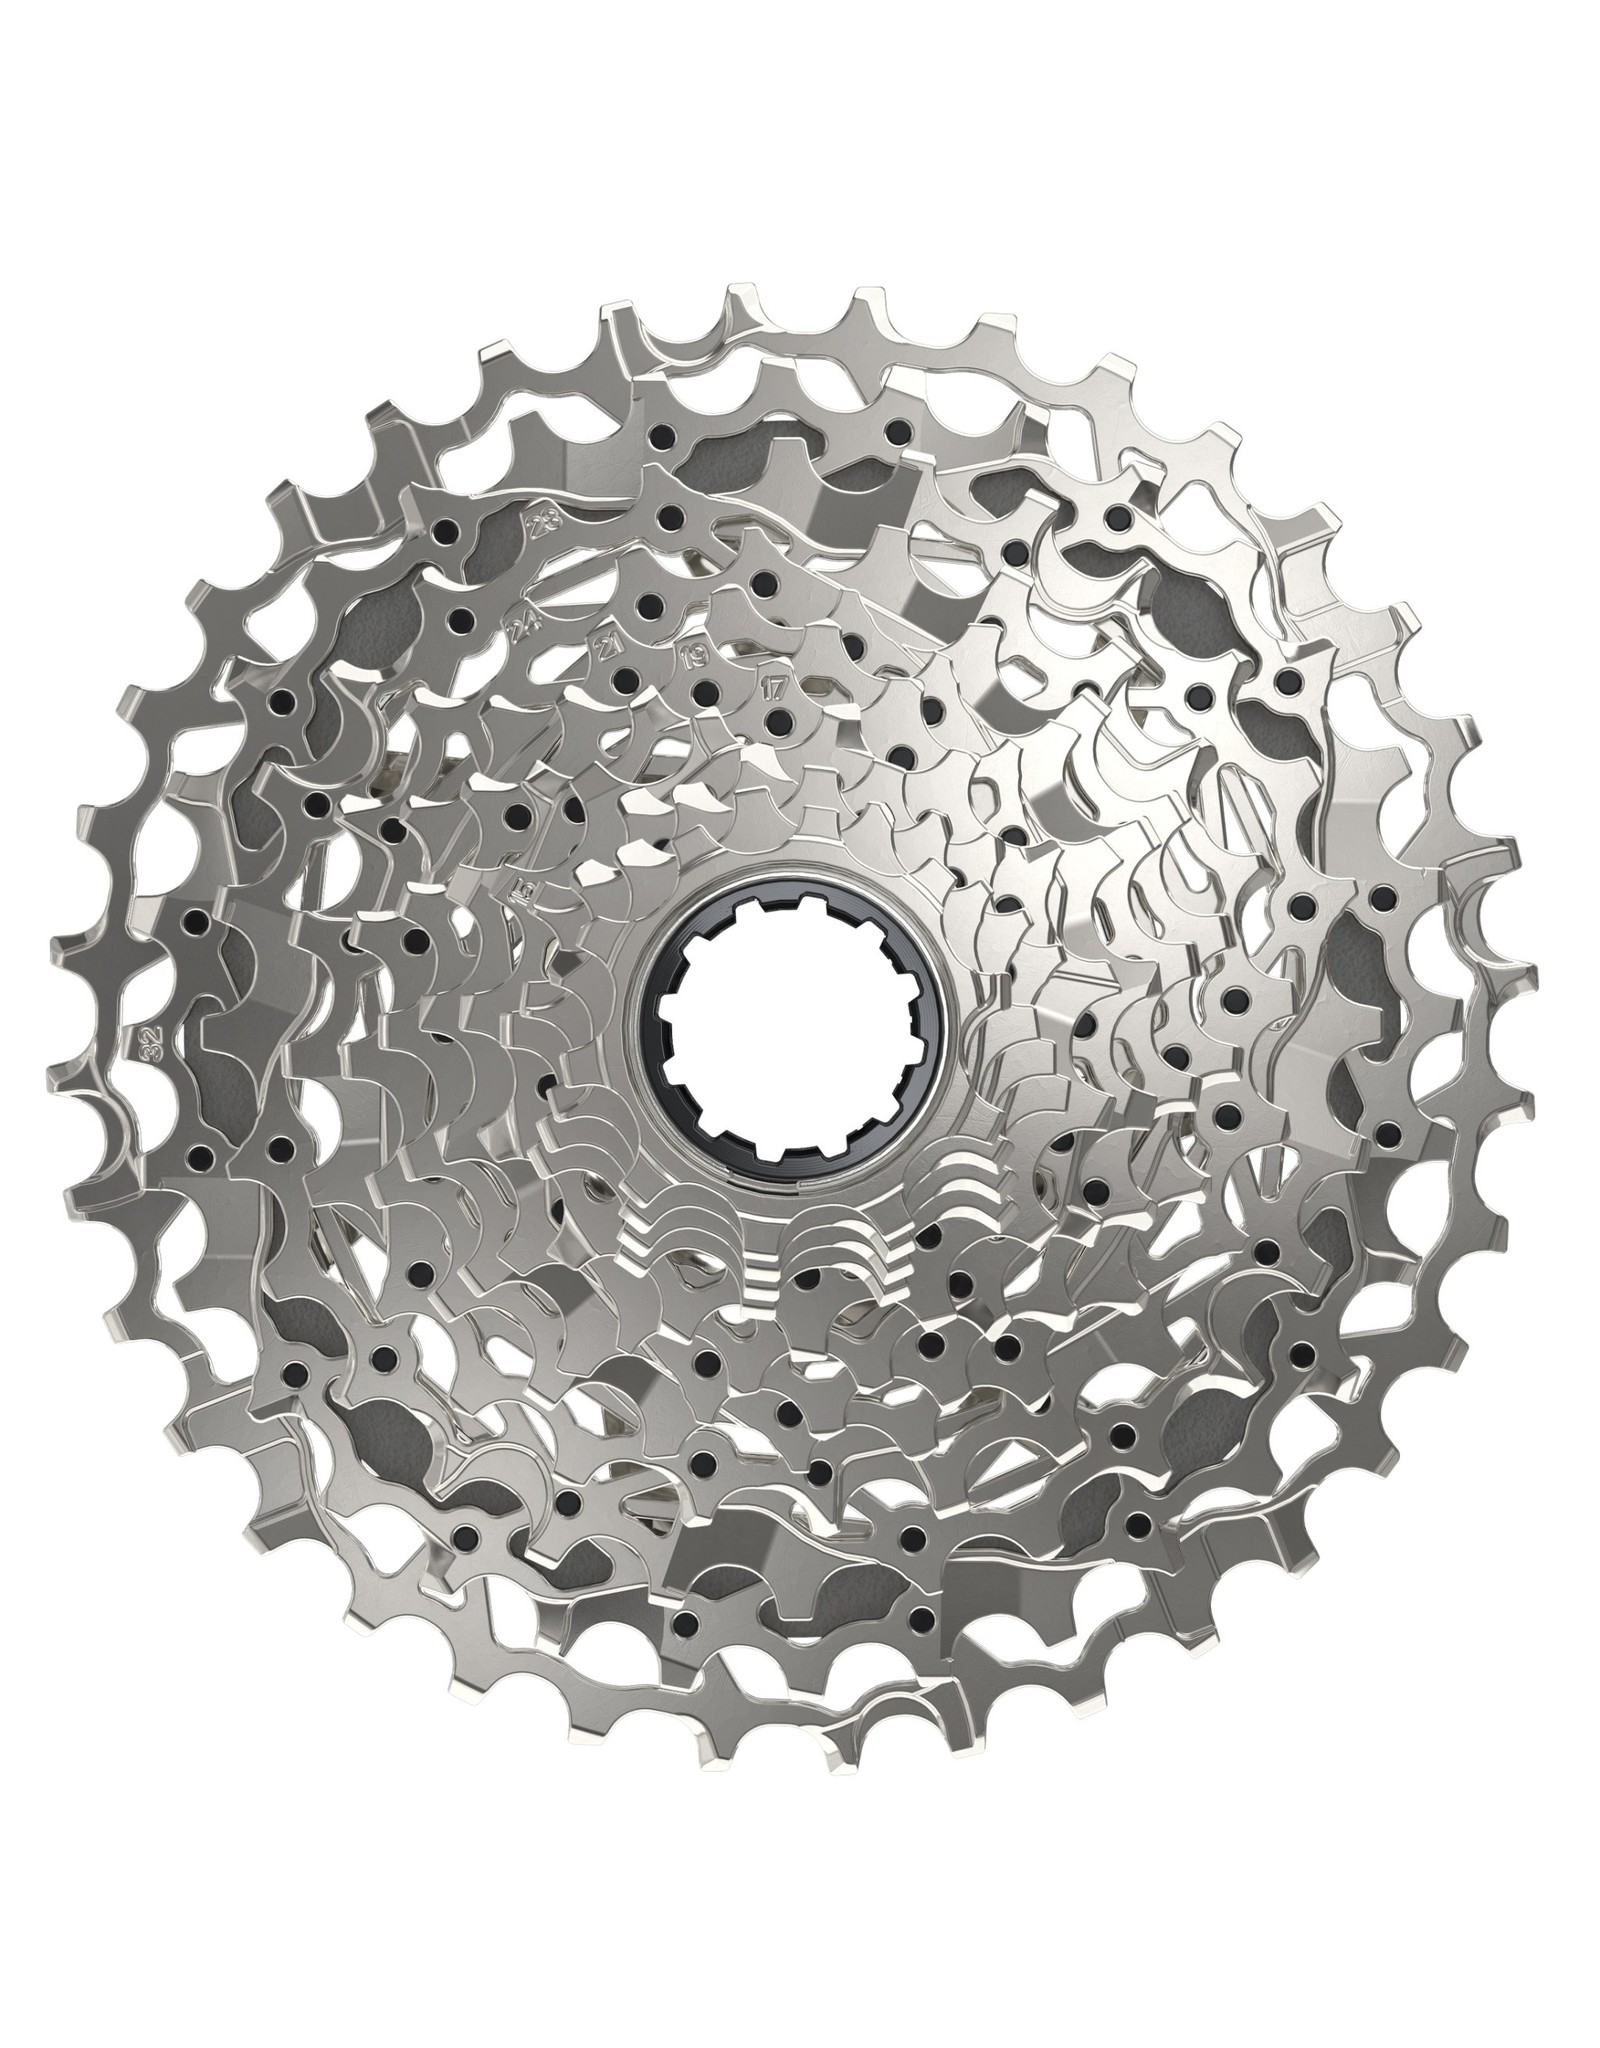 SRAM SRAM Rival AXS XG-1250 Cassette 12-Speed, 10-36t, Silver, For XDR Driver Body, D1